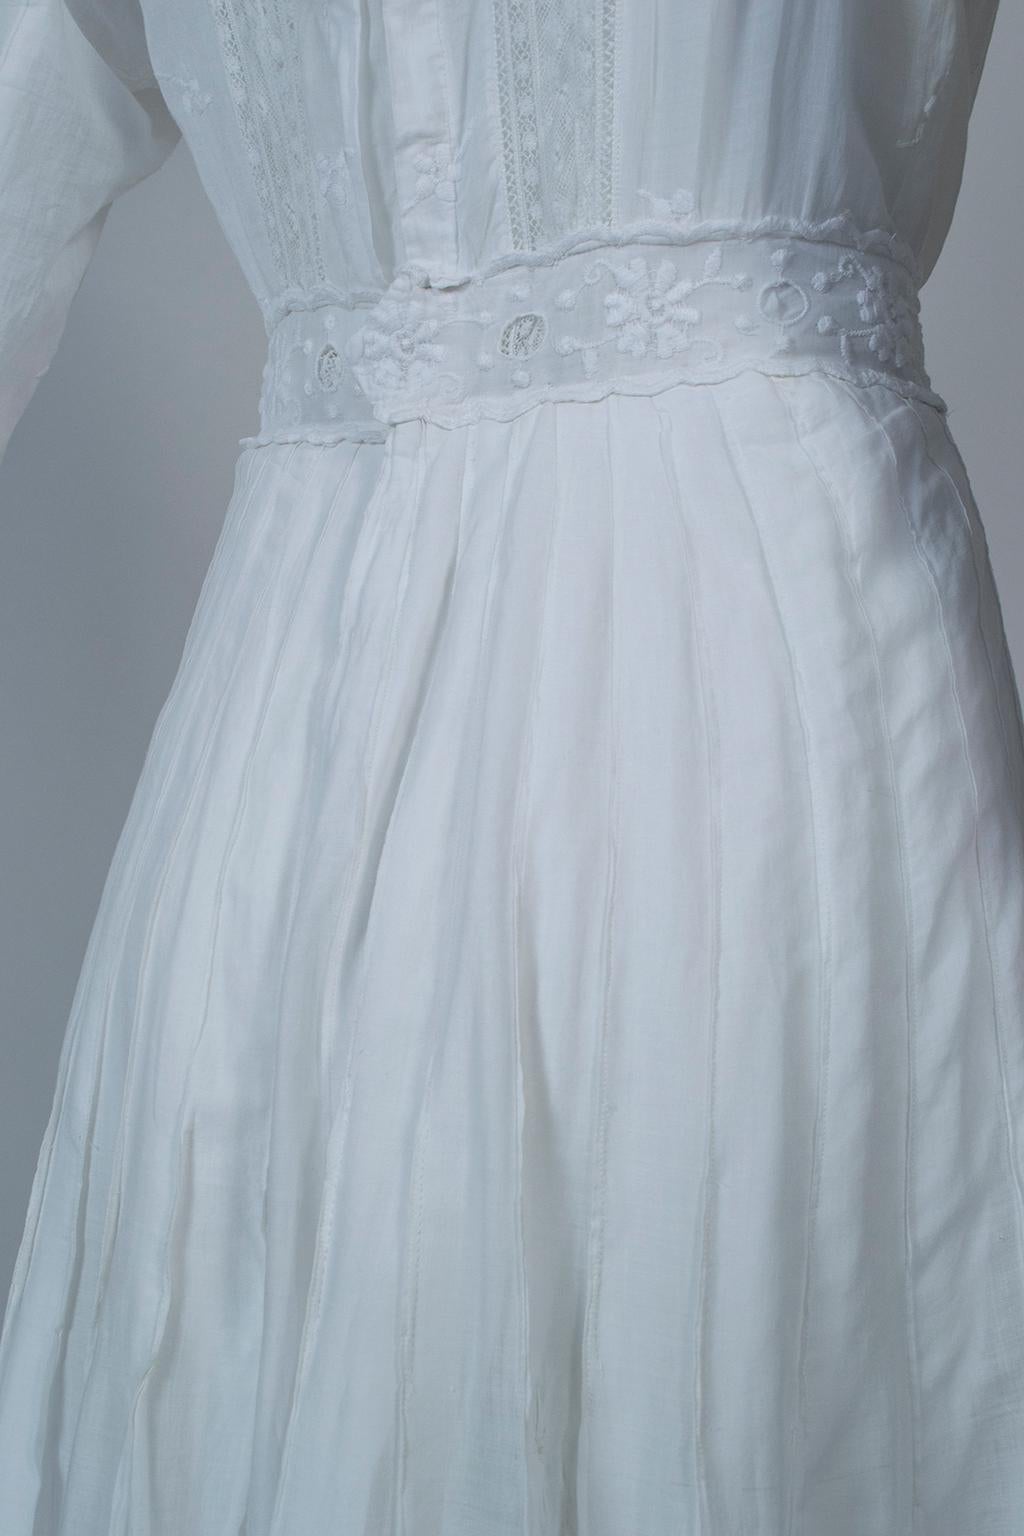 Victorian White Eyelet and Lace Shoulder Pleat Afternoon Tea Dress - M, 1880s 7